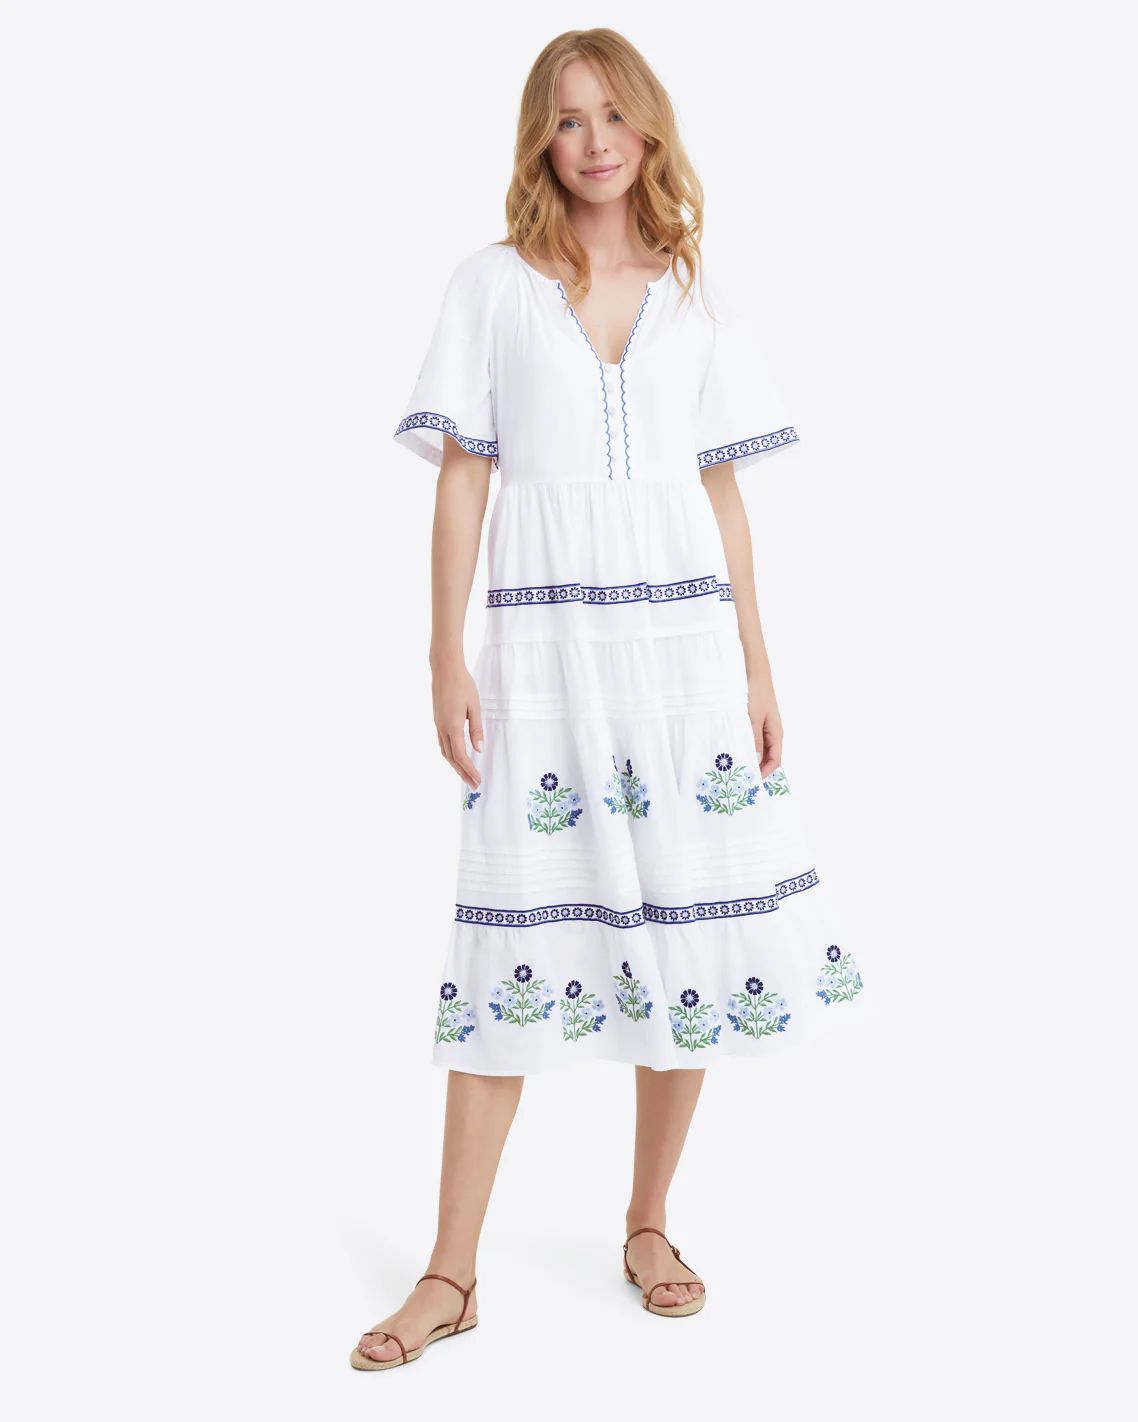 Carlene Dress in Floral Embroidery | Draper James (US)